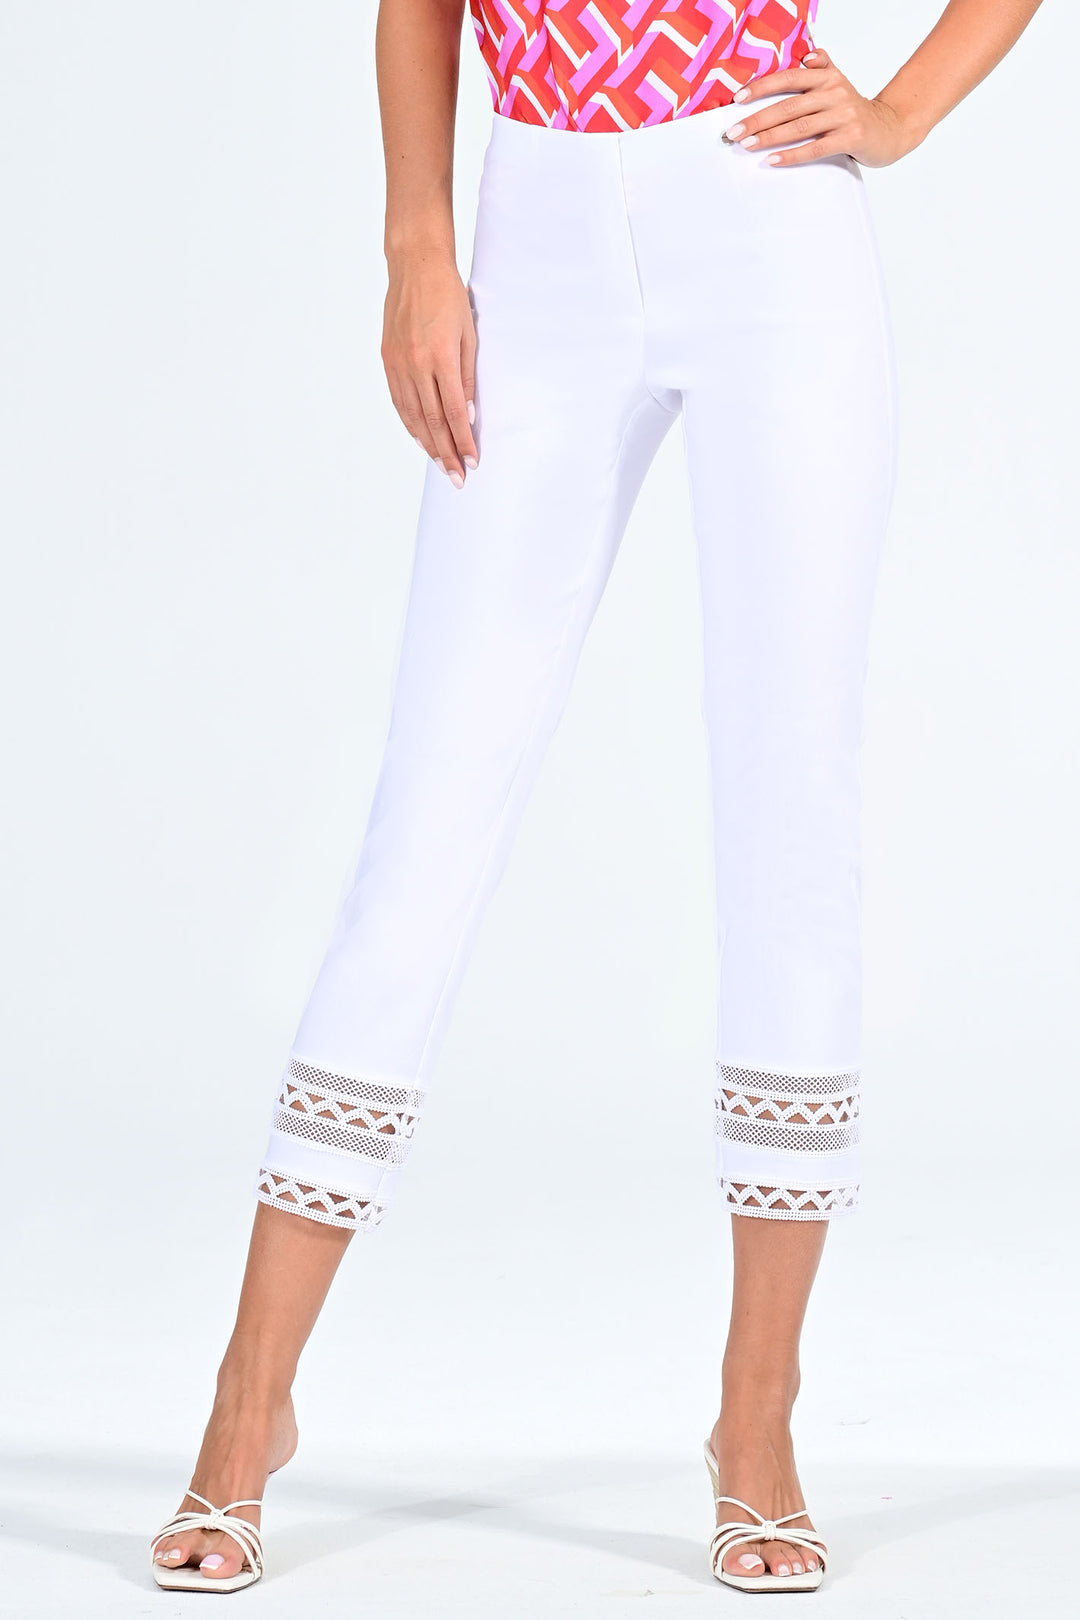 Robell Marie 09 53489 5499 10 White Ankle Detail Trousers 68cm - Dotique